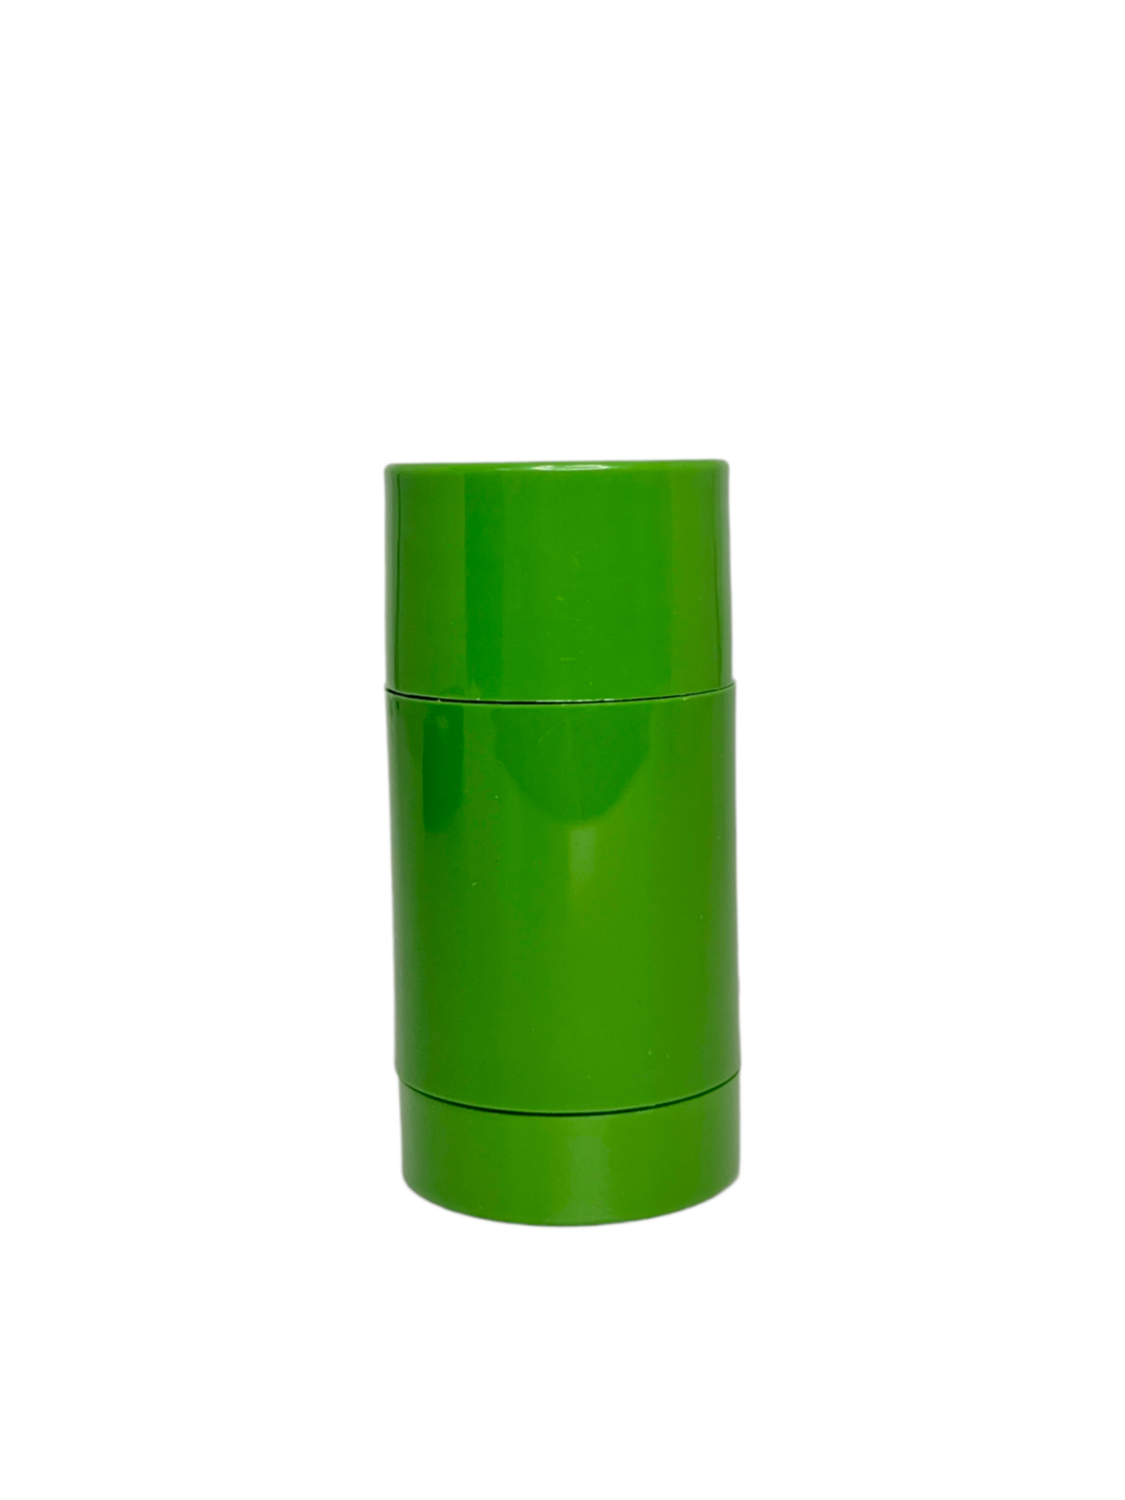 30g Plastic Deostick Container -Green